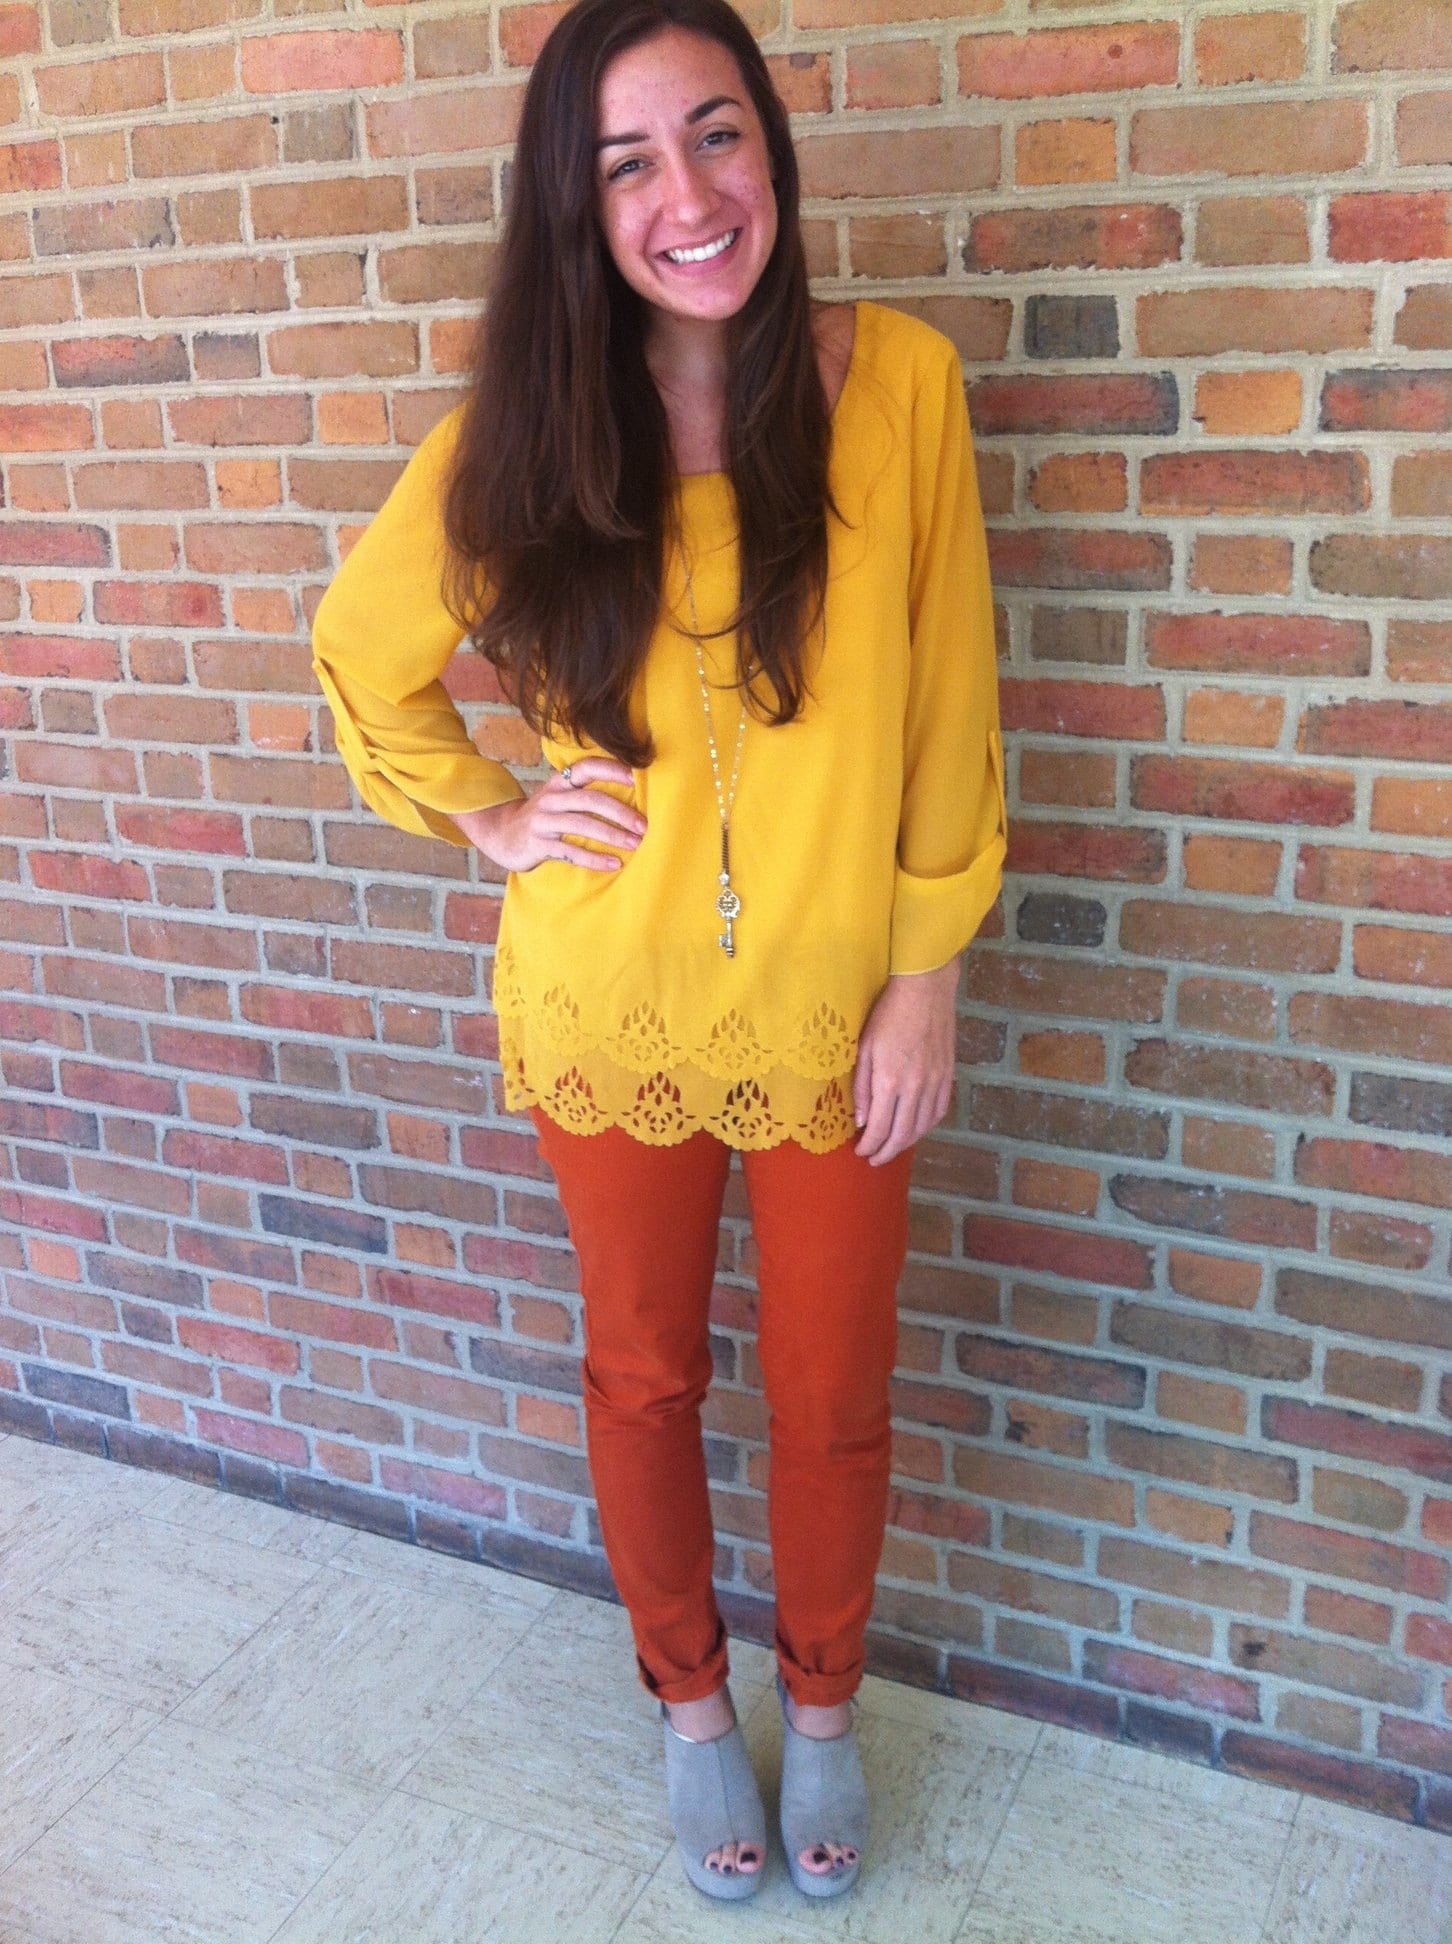 Campus Style: Christy Cleger sports cheap fall finds